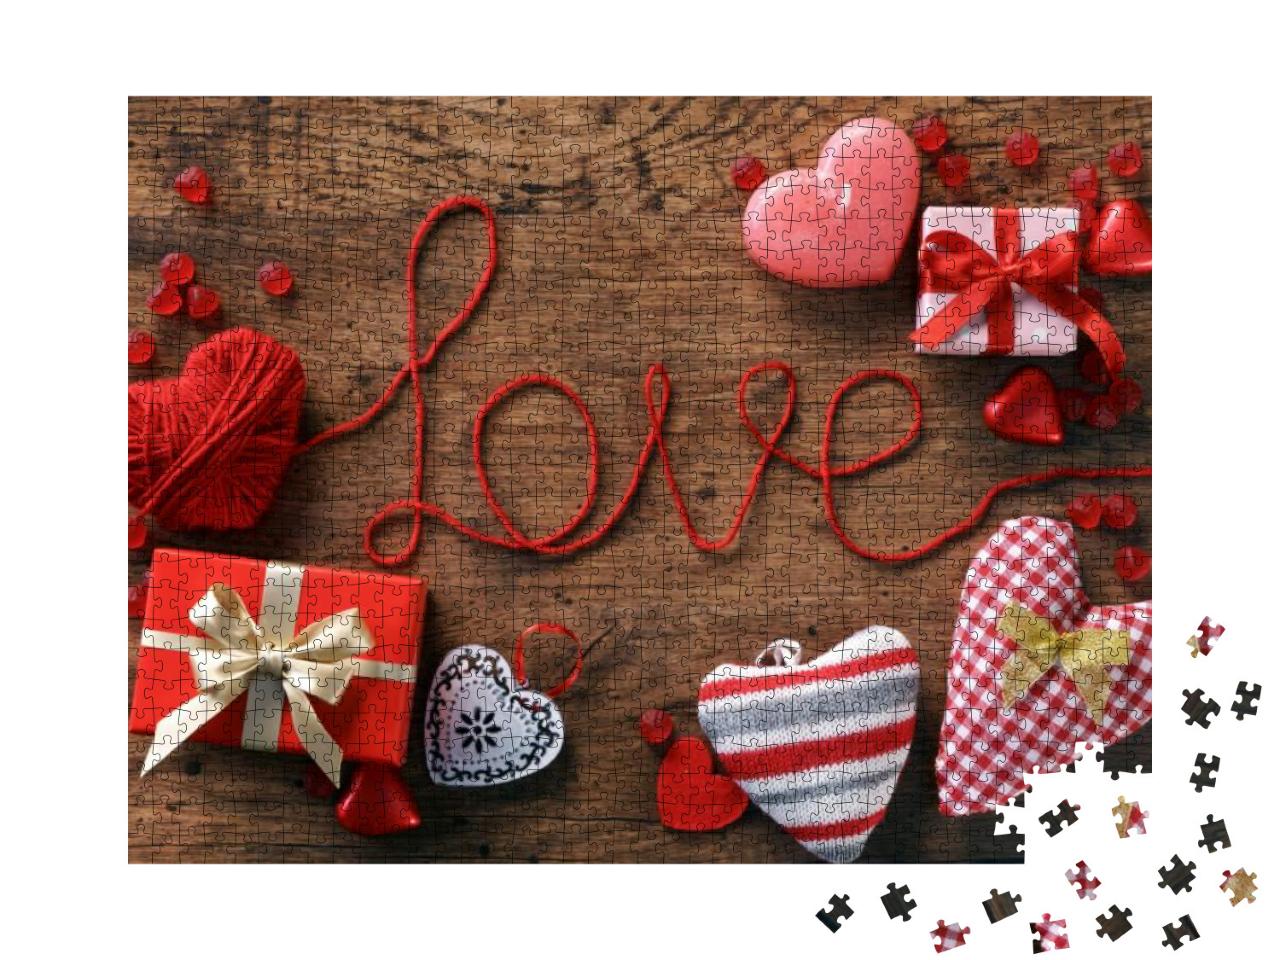 Red Heart, Word Love & Valentines Day Gifts Boxes on Wood... Jigsaw Puzzle with 1000 pieces